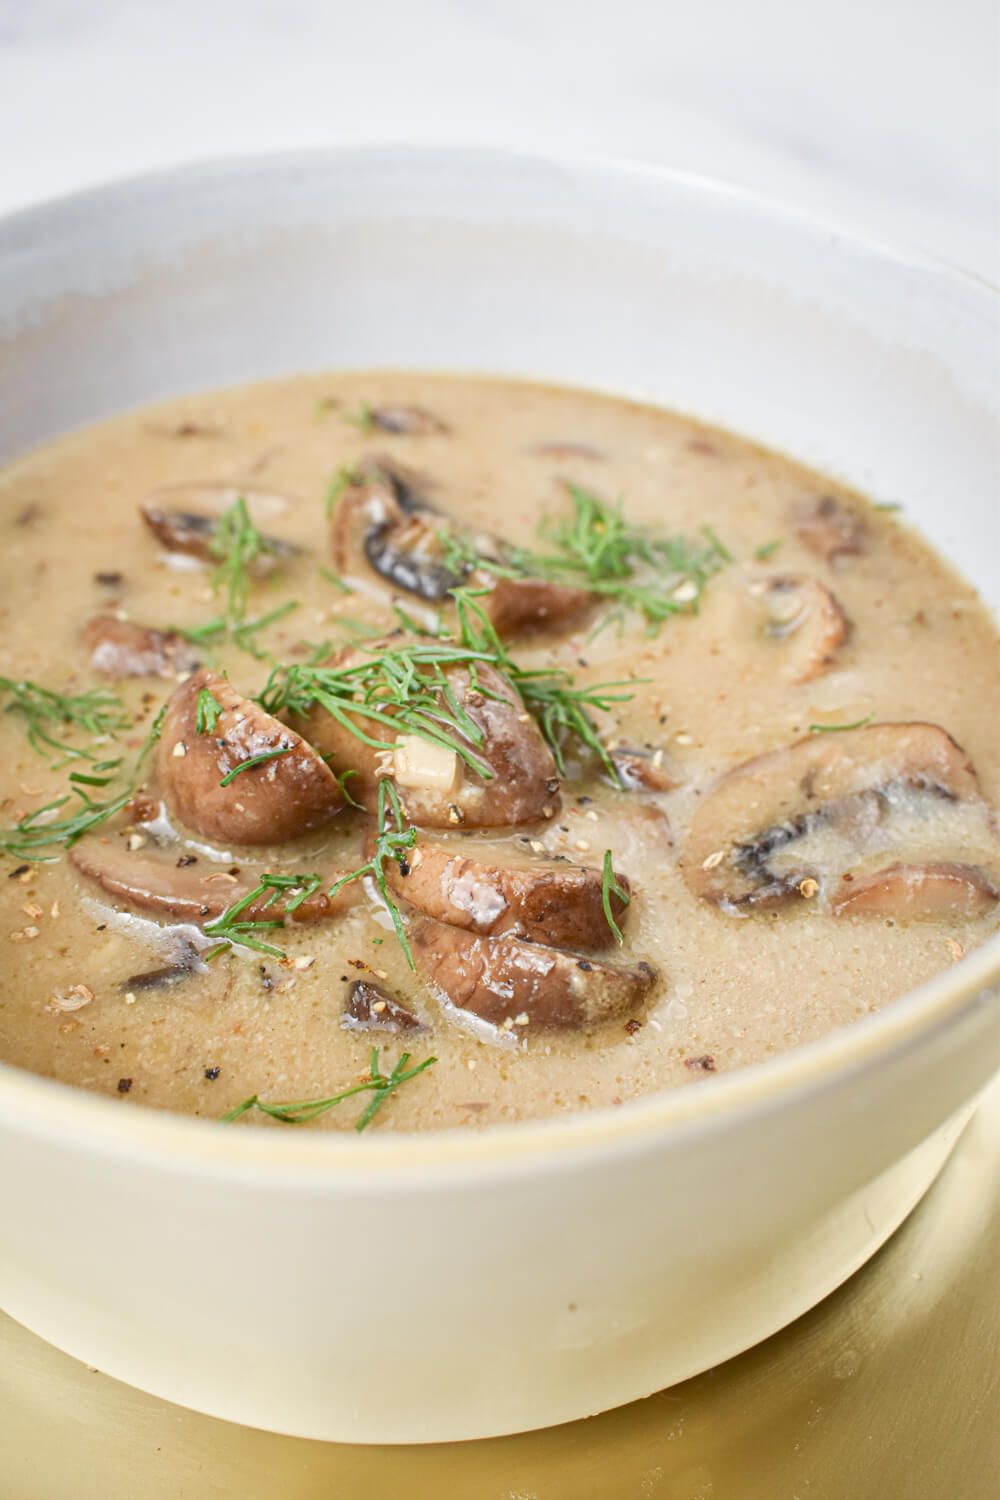 Creamy mushroom soup in a bowl with cooked mushrooms in a creamy broth.